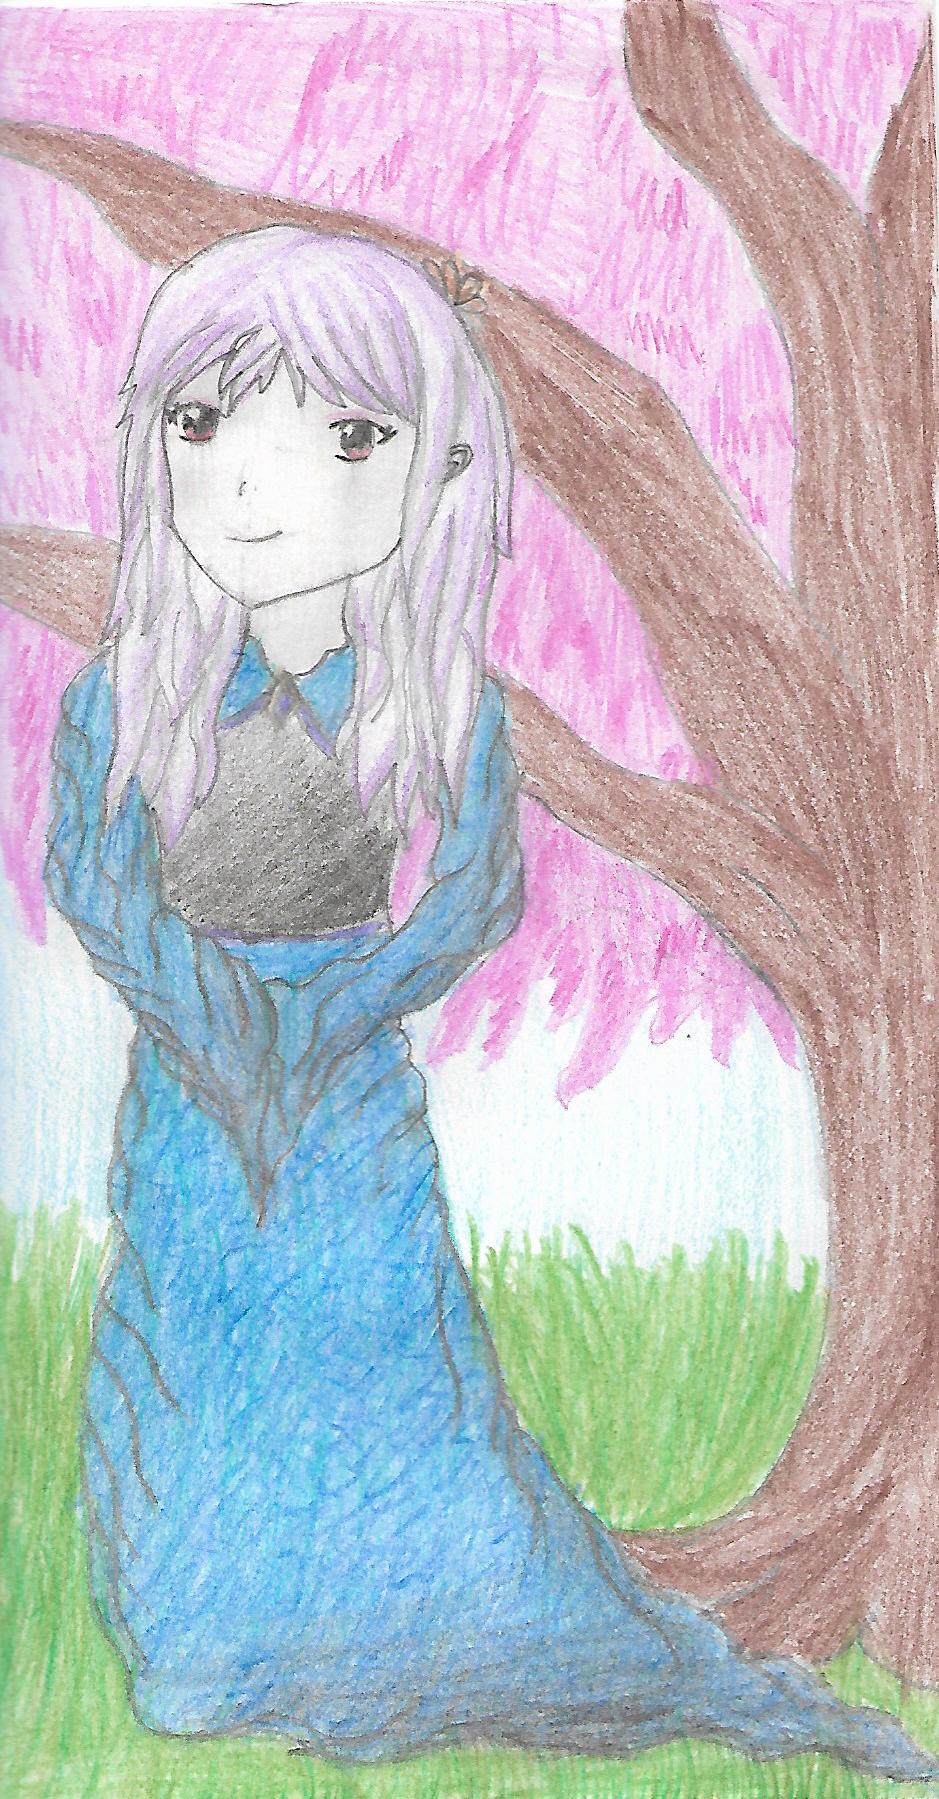 Anime Girl With Cherry Blossom Tree by Unipenguin1134 on DeviantArt